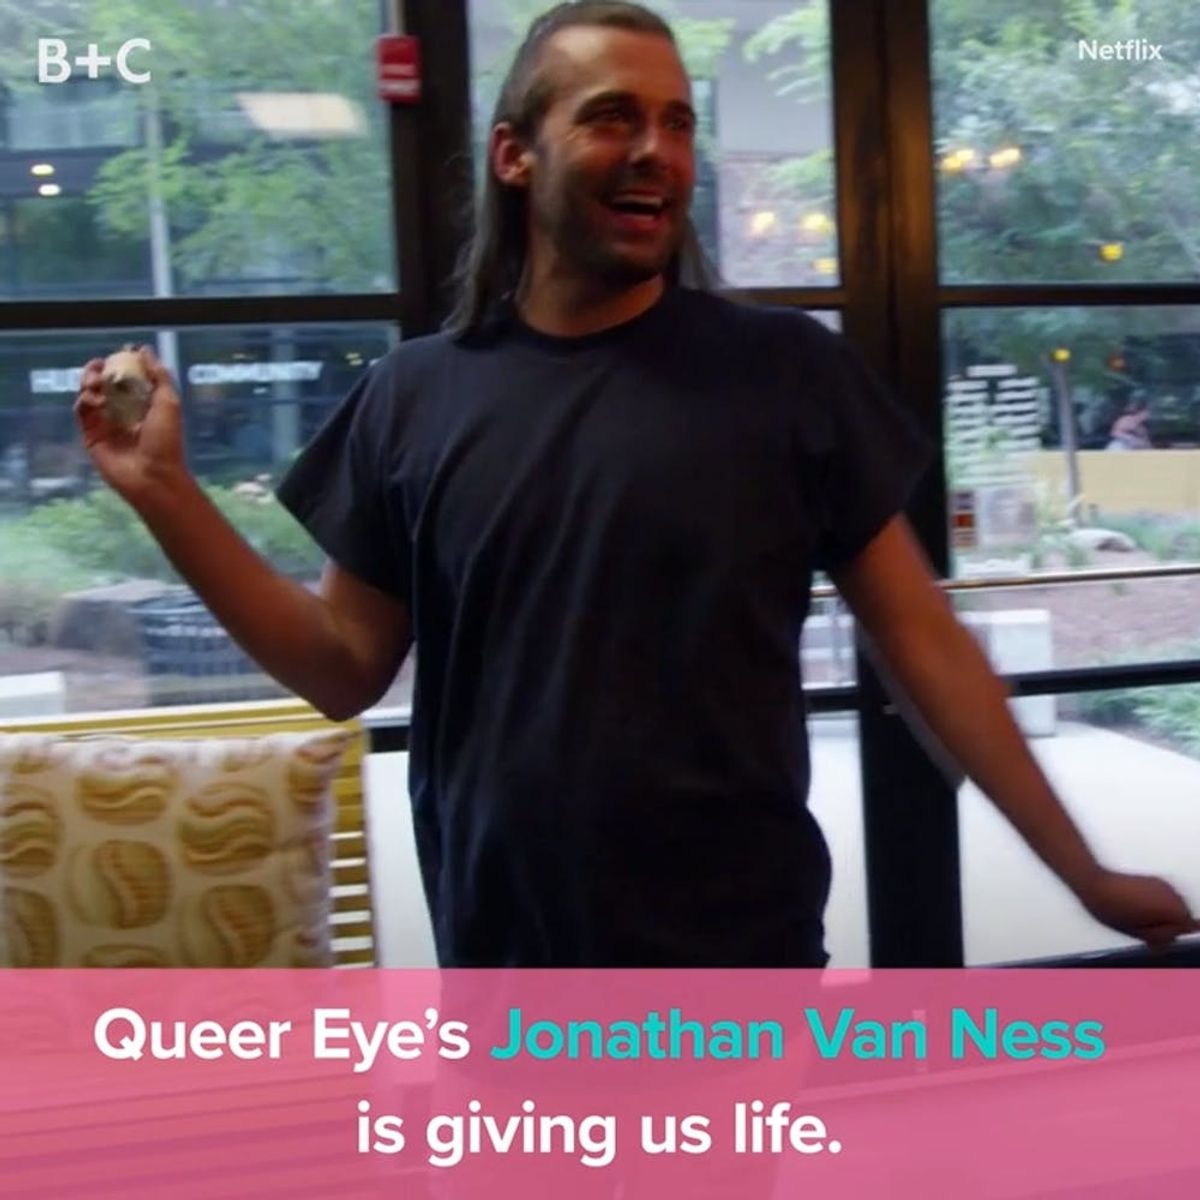 Jonathan Van Ness From ‘Queer Eye’ Is Giving Us Life